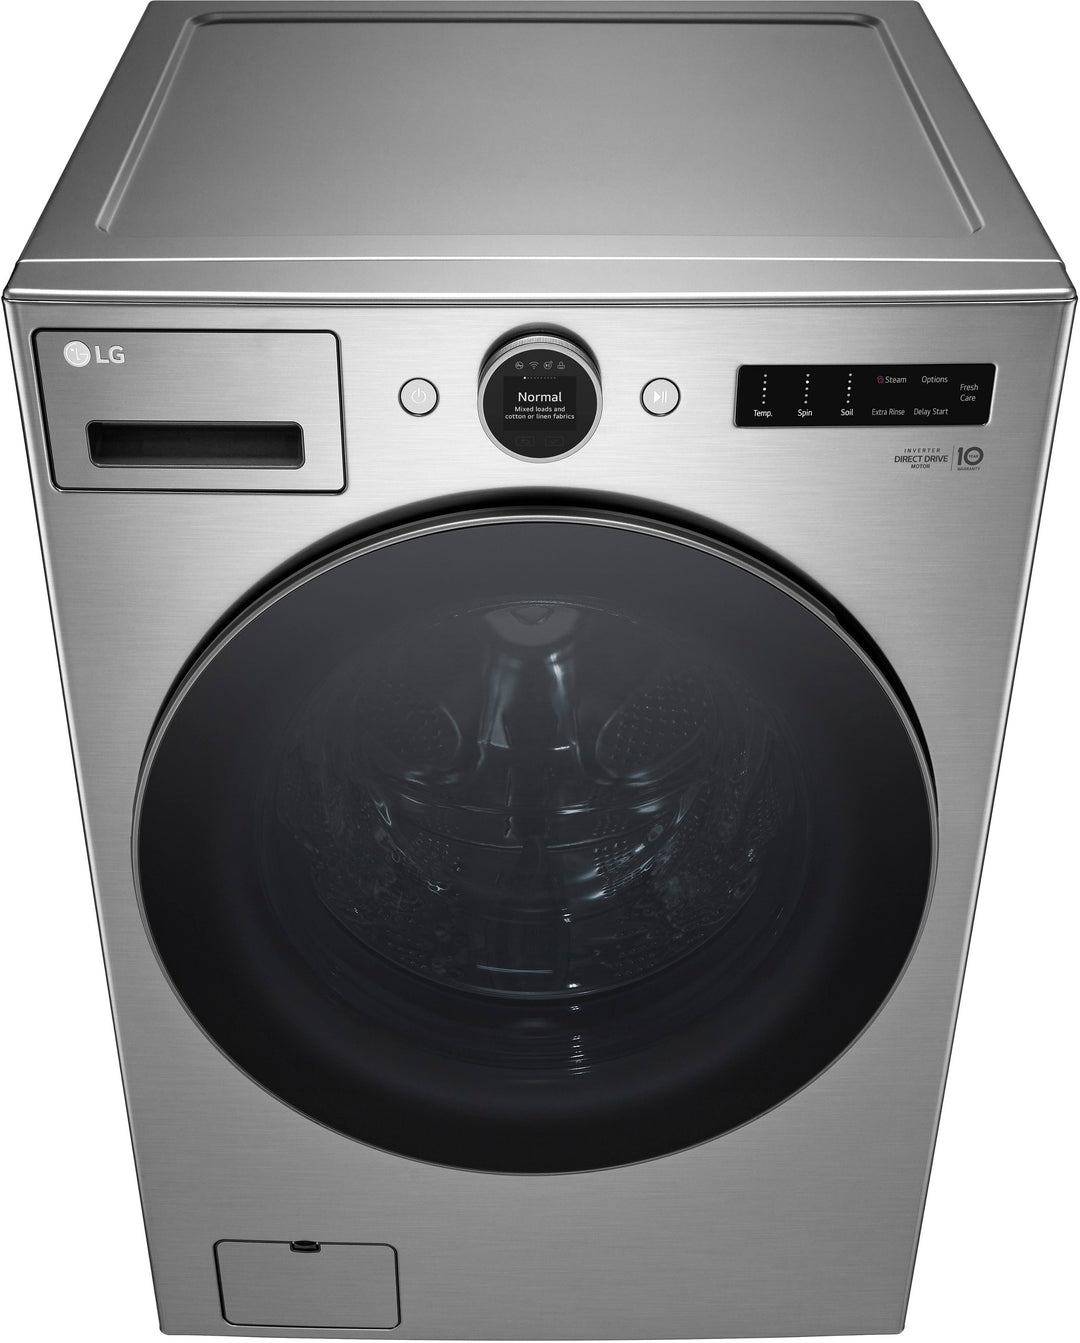 LG - 4.5 Cu. Ft. High-Efficiency Smart Front Load Washer with Steam and TurboWash 360 - Graphite Steel_6